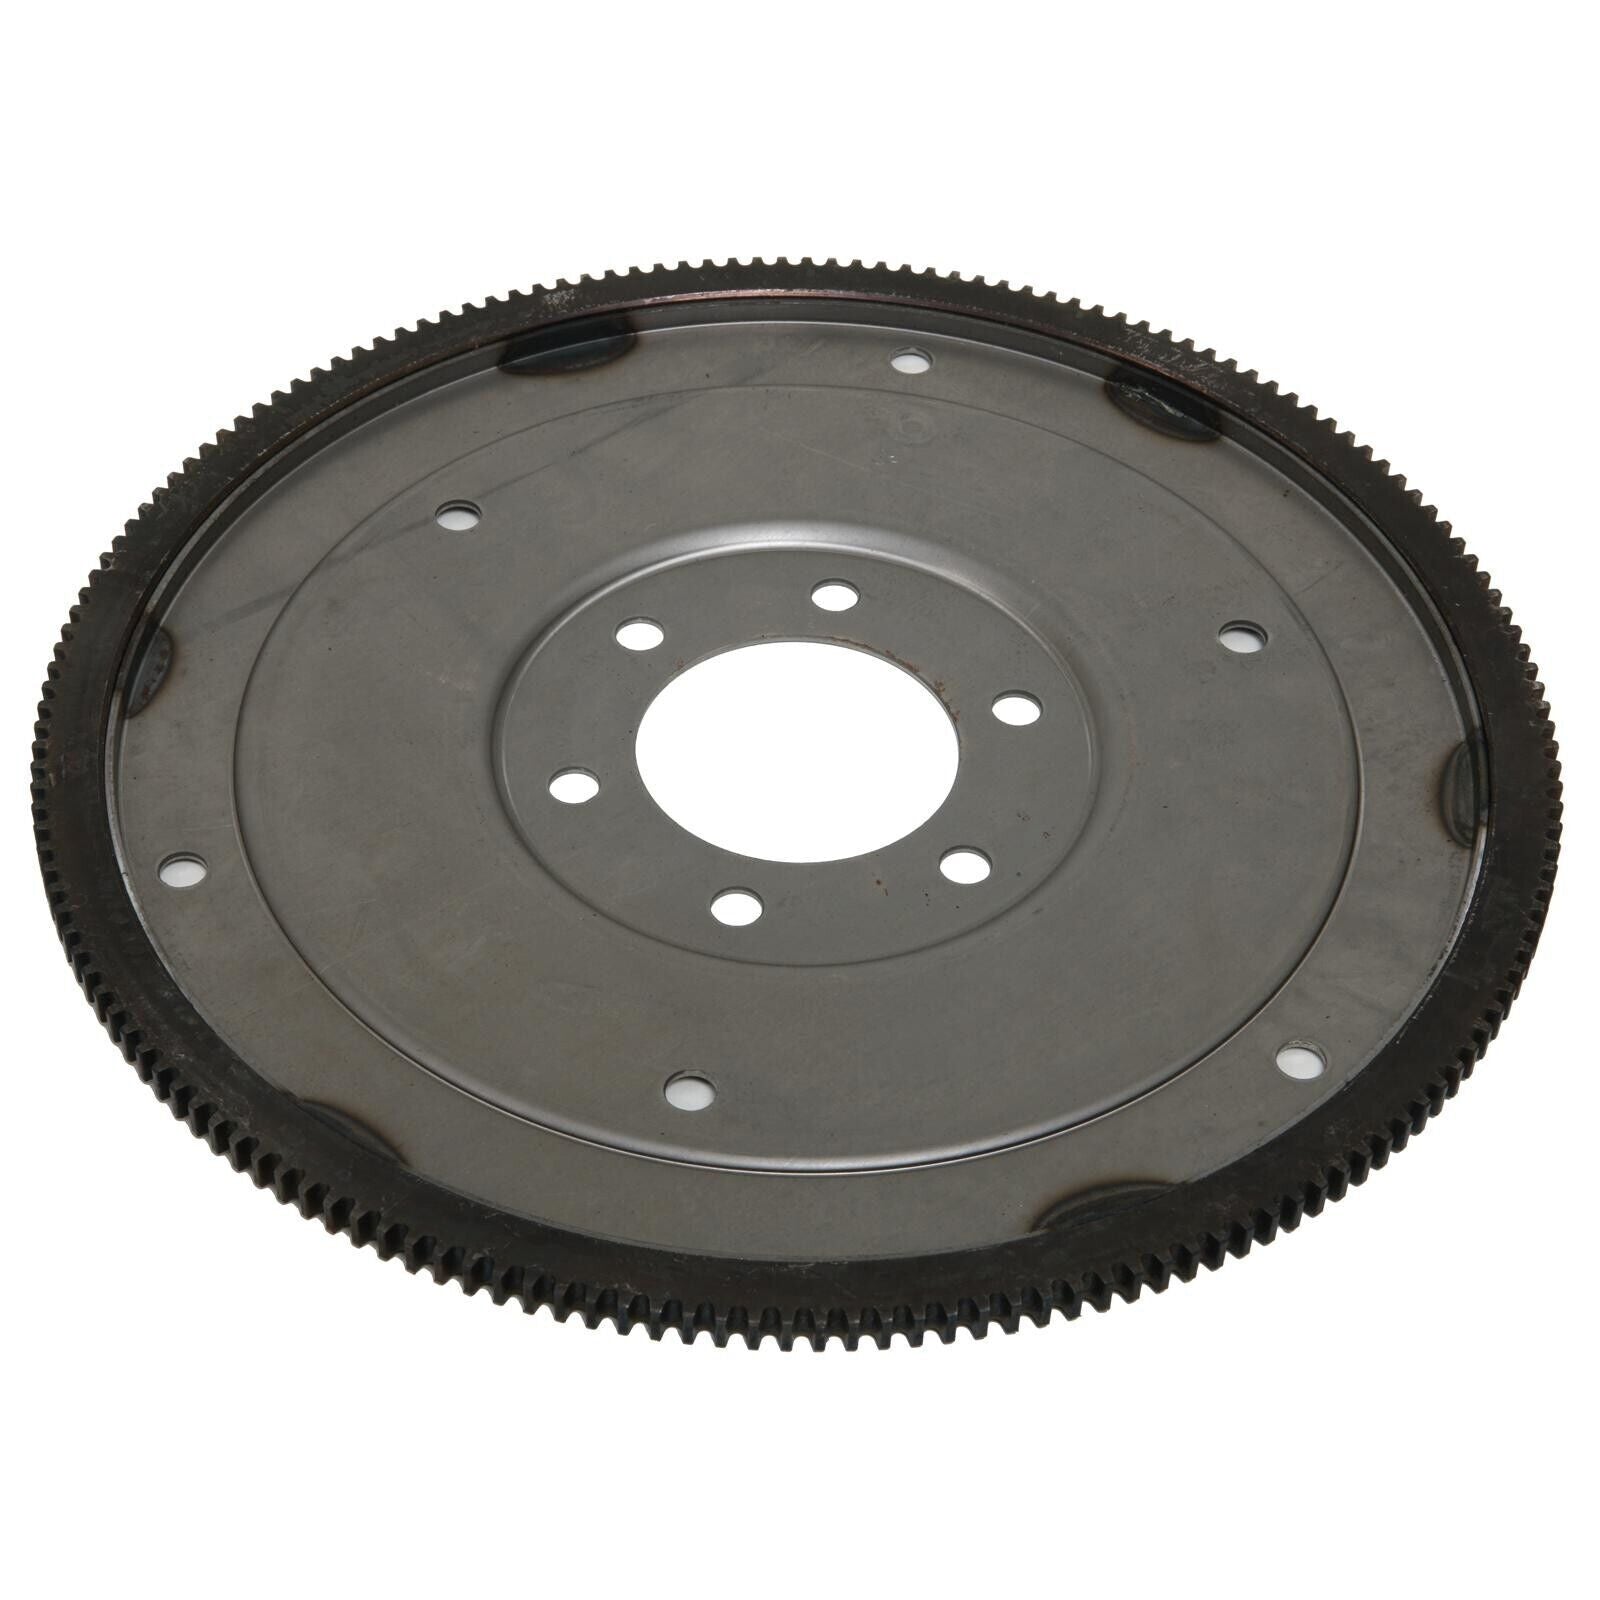 Cadillac 368 425 472 500 V8 Pioneer Drive Plate # FRA-106